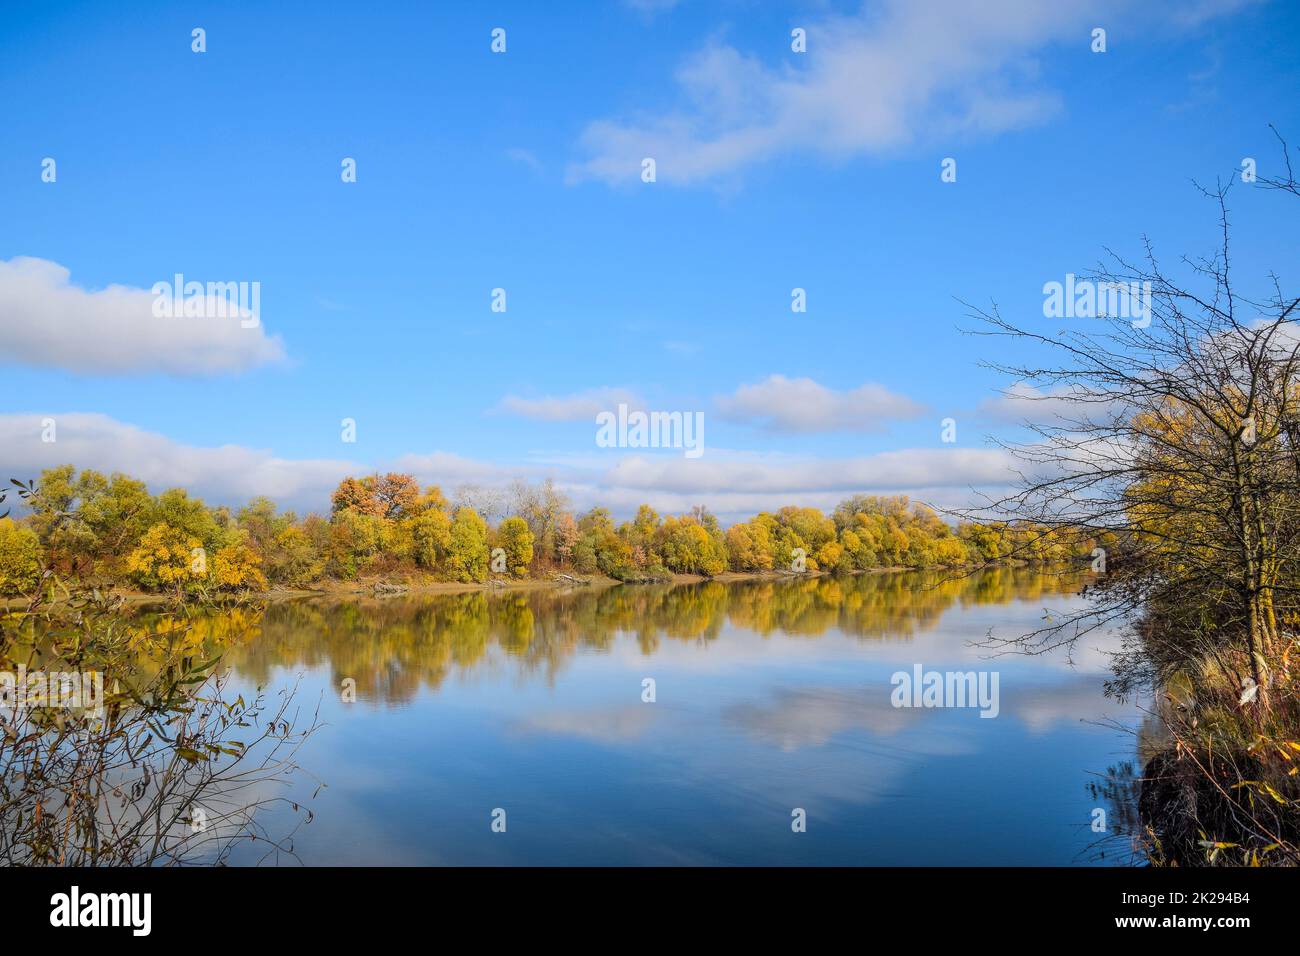 Autumn landscape. River and river bank with yellow trees. Willow and poplar on the river bank. Stock Photo